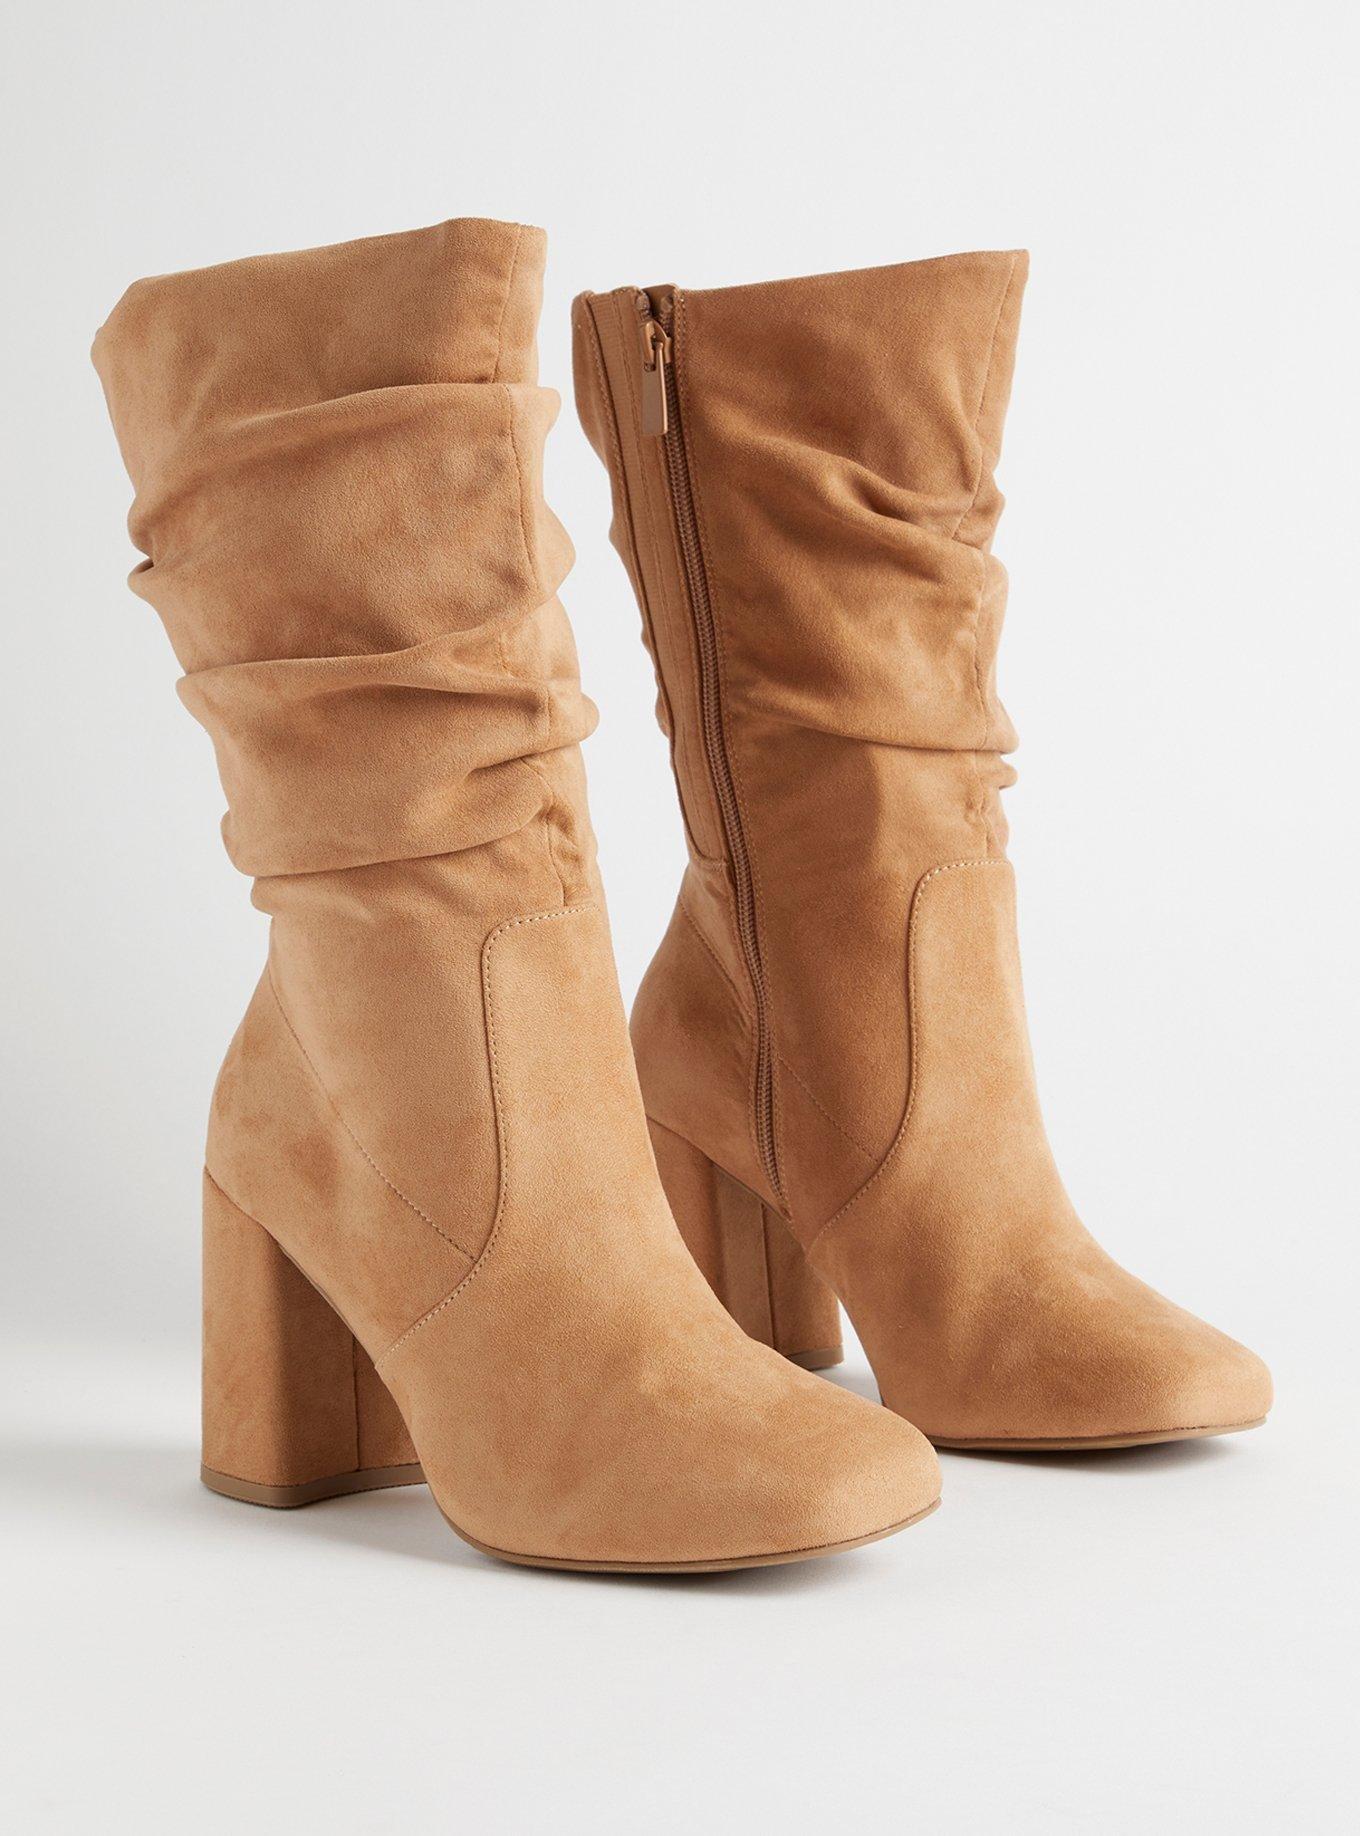 Narrow Calf Boots—Favorite Styles for Slim Legs - HubPages